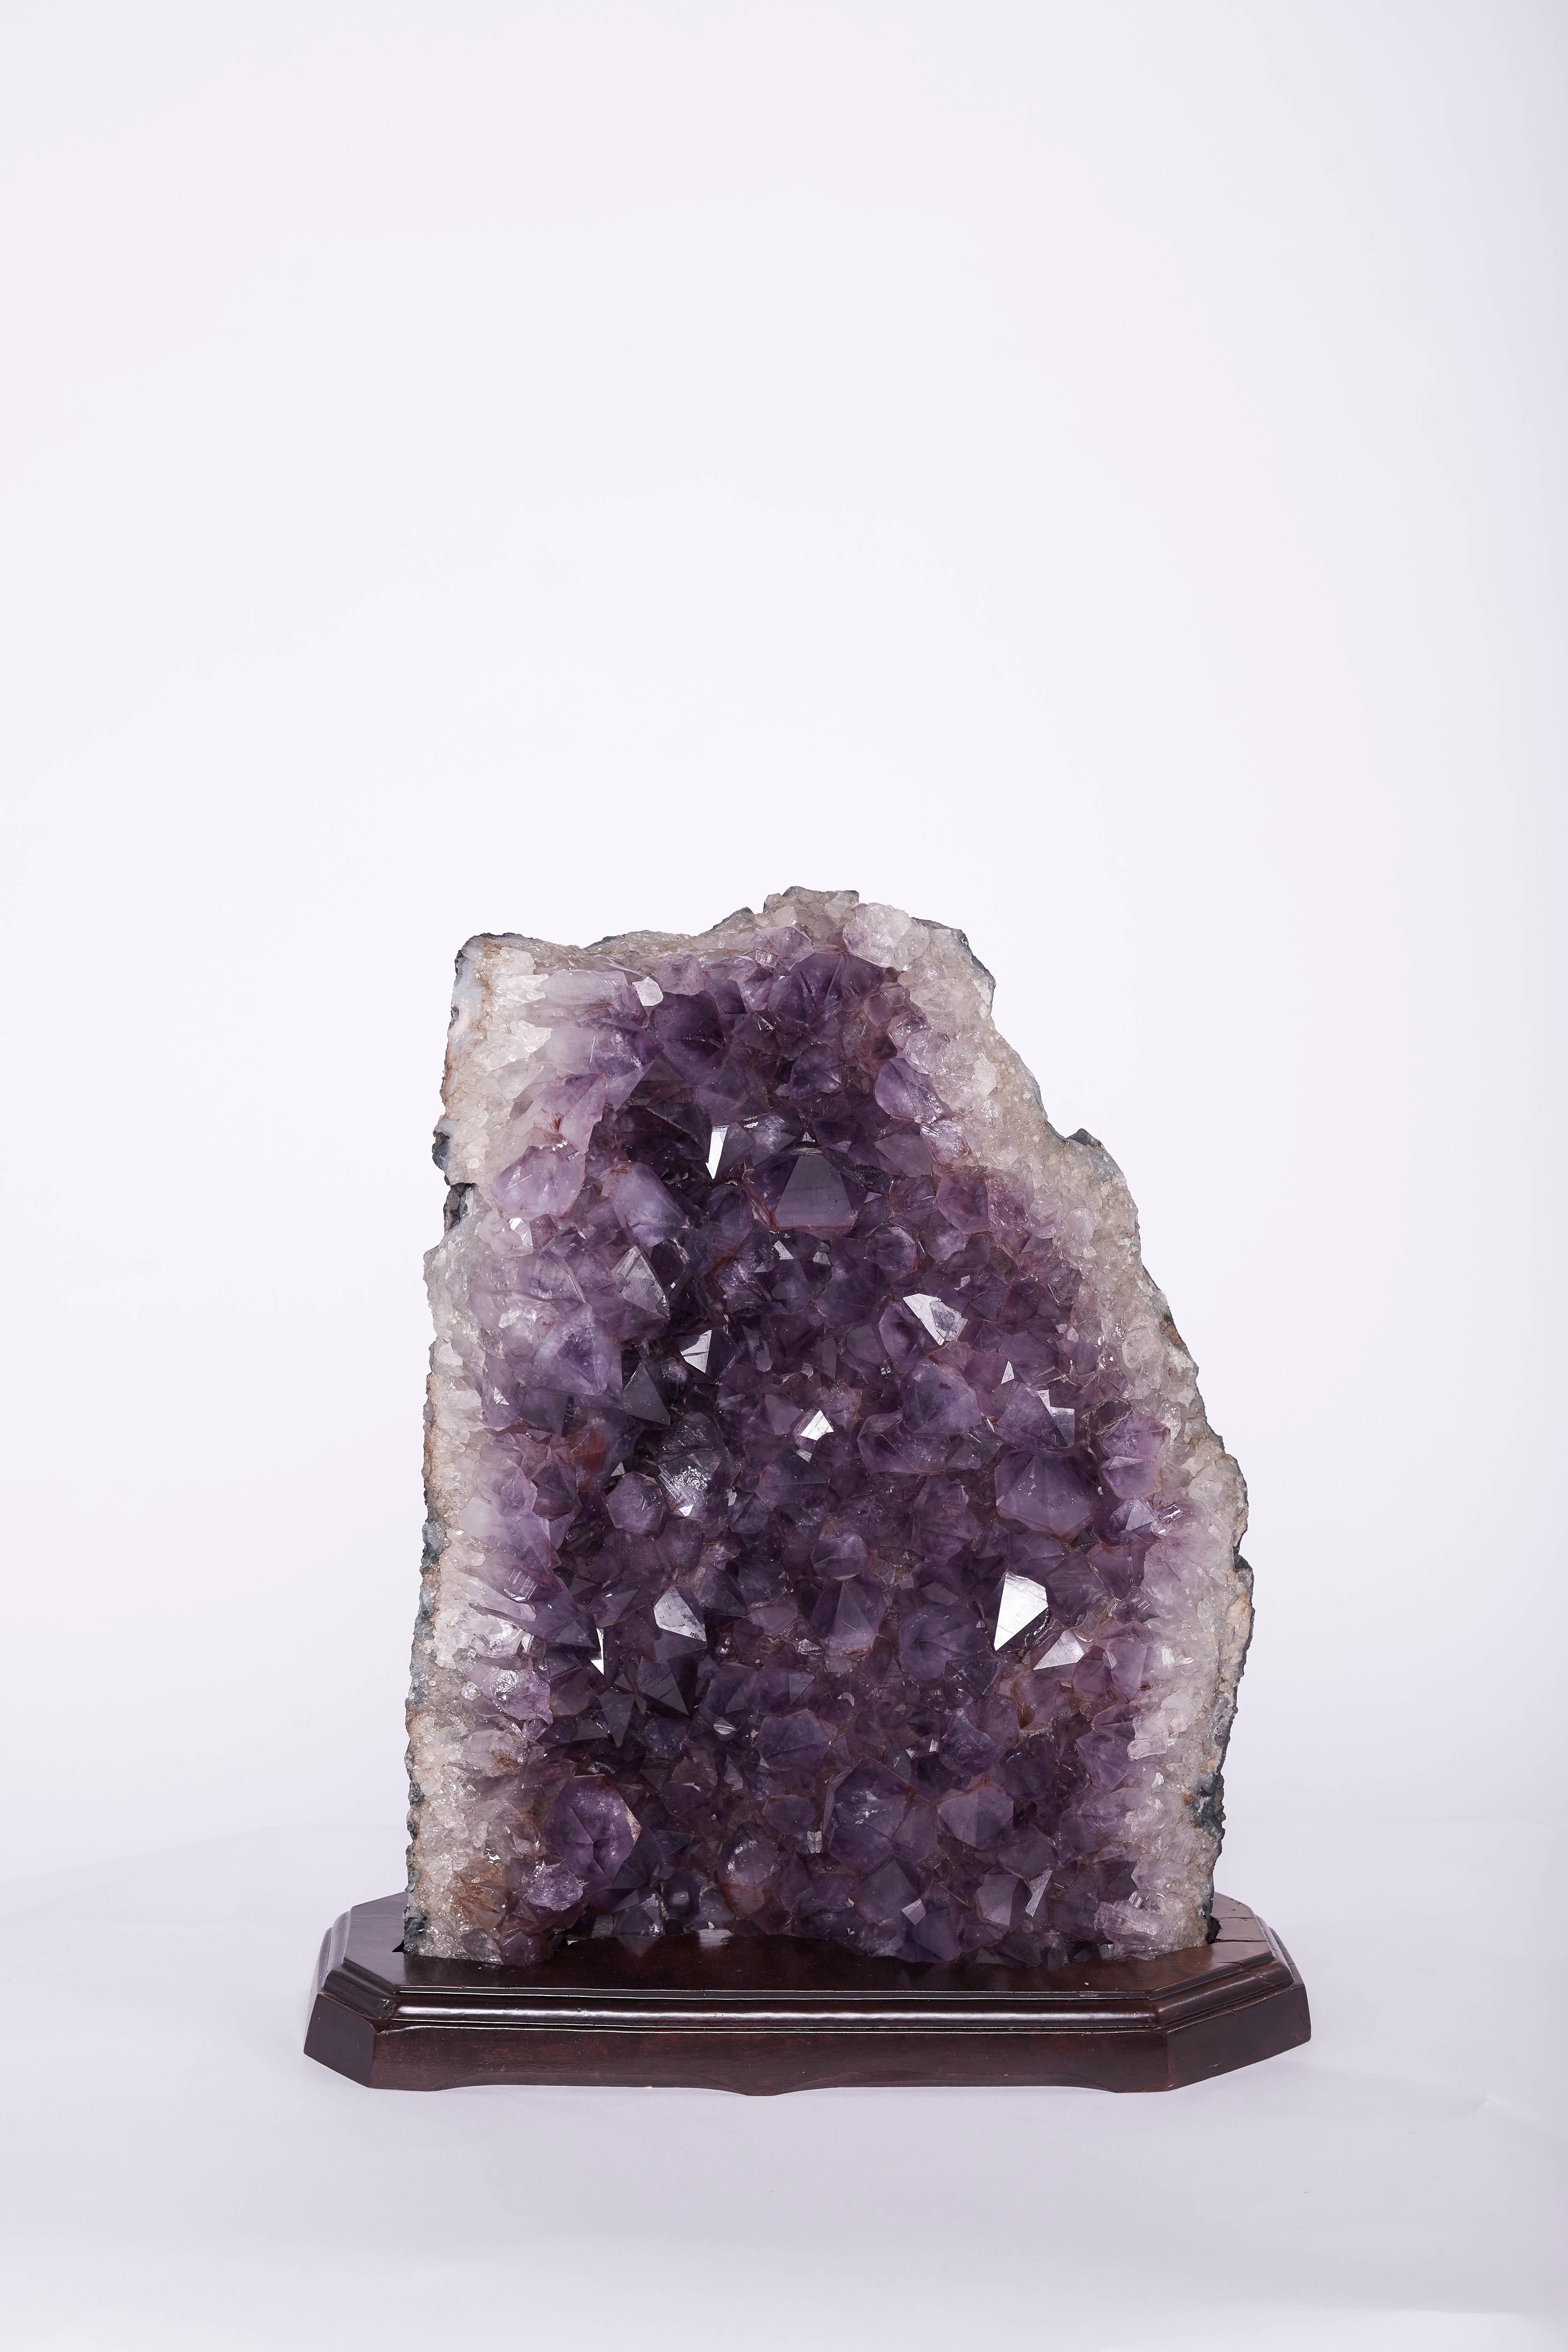 This Geode Amethyst features a free forme intense purple color and a variety of crystals. The edge of the piece is polished to reveal the white quartz layer and rests on a wood base so the amethyst is standing. Due to its intense deep purple